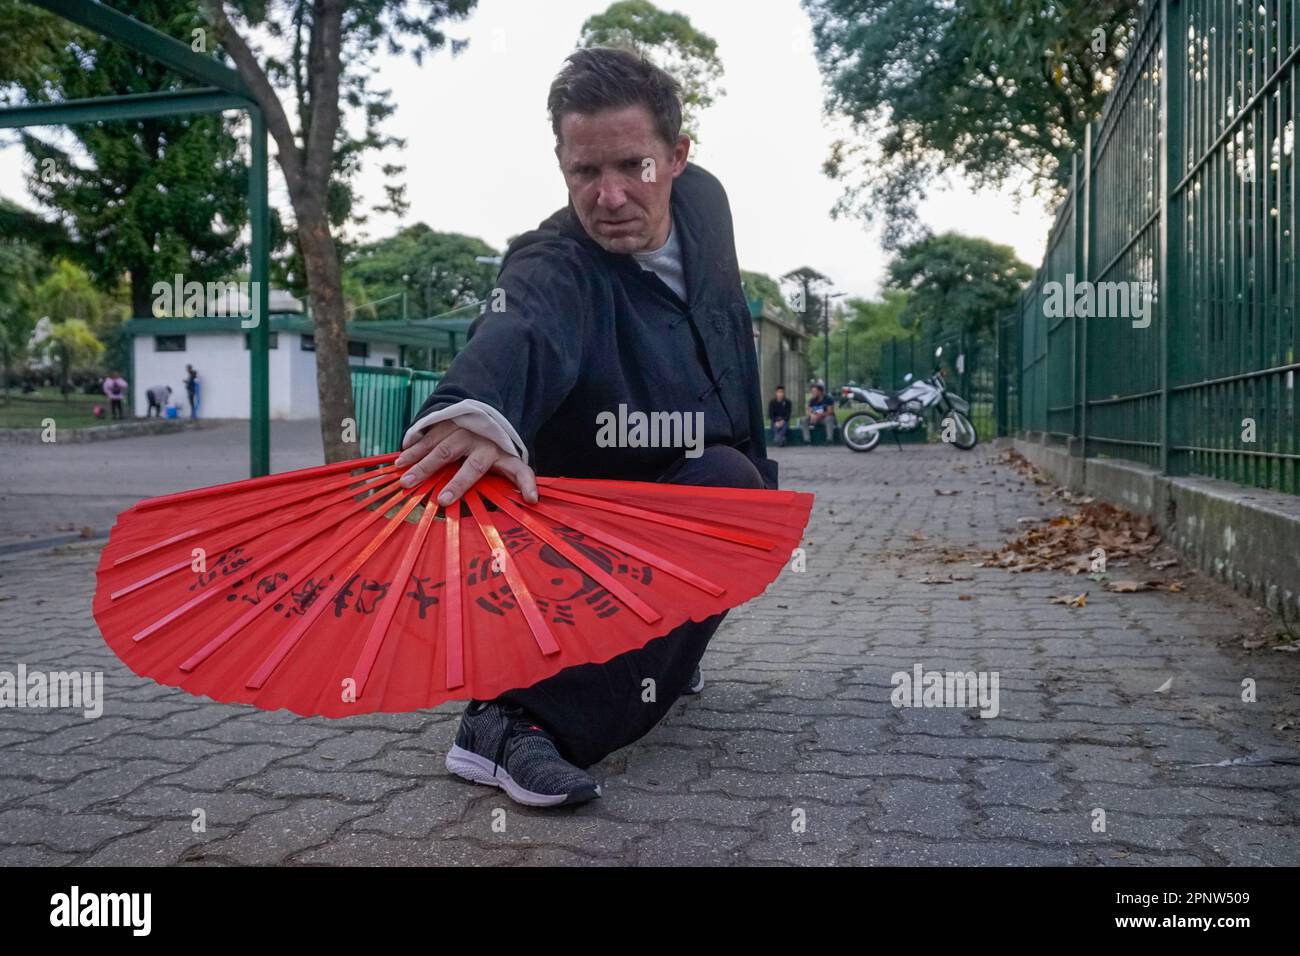 Patricio Zanet performs Wudang-style kung fu with a fan at Parque Centenario in Buenos Aires, Argentina on April 21, 2022. Zanet says this martial art, which encourages well-being of the body, mind and spirit, represents integrity. (Lucila Pellettieri/Global Press Journal) Stock Photo